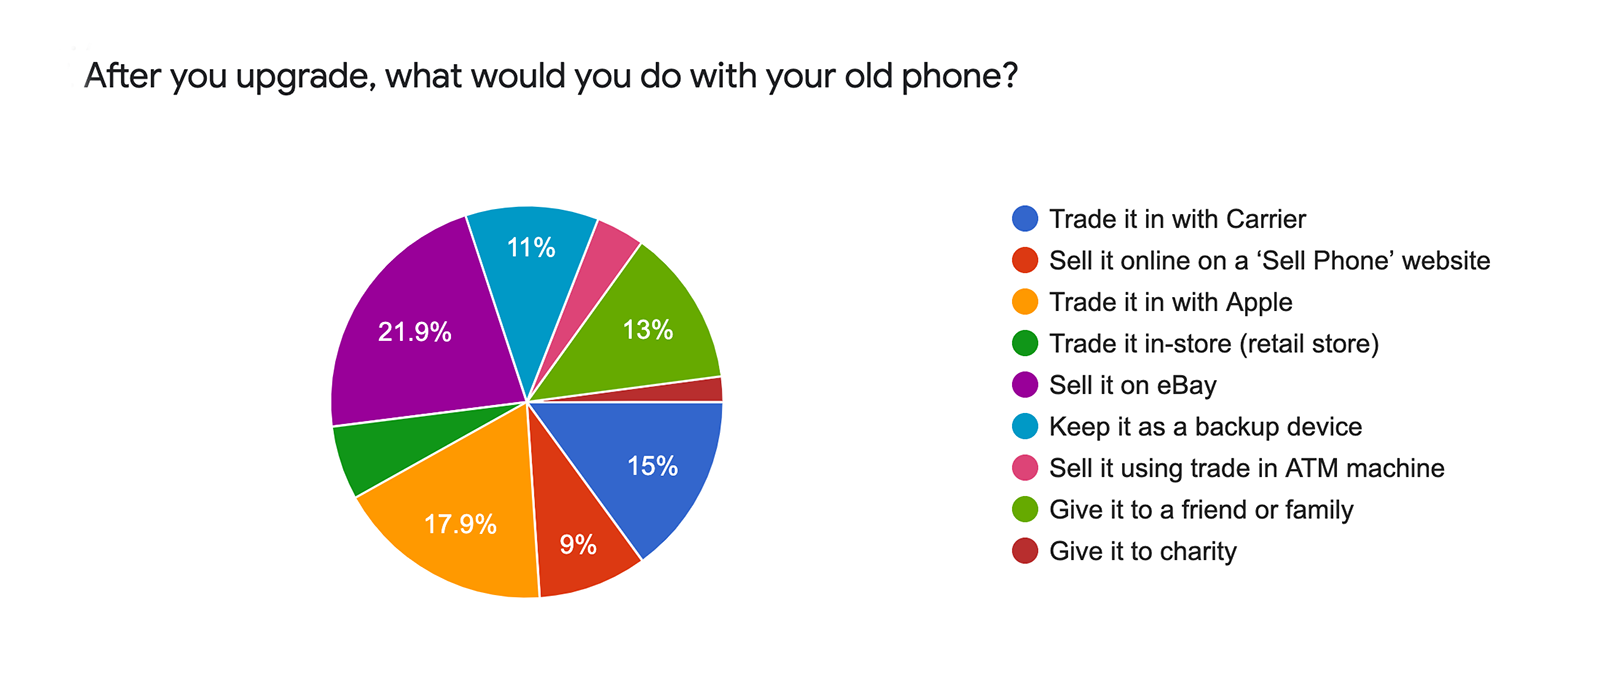 What do people do with their old phone when they upgrade?